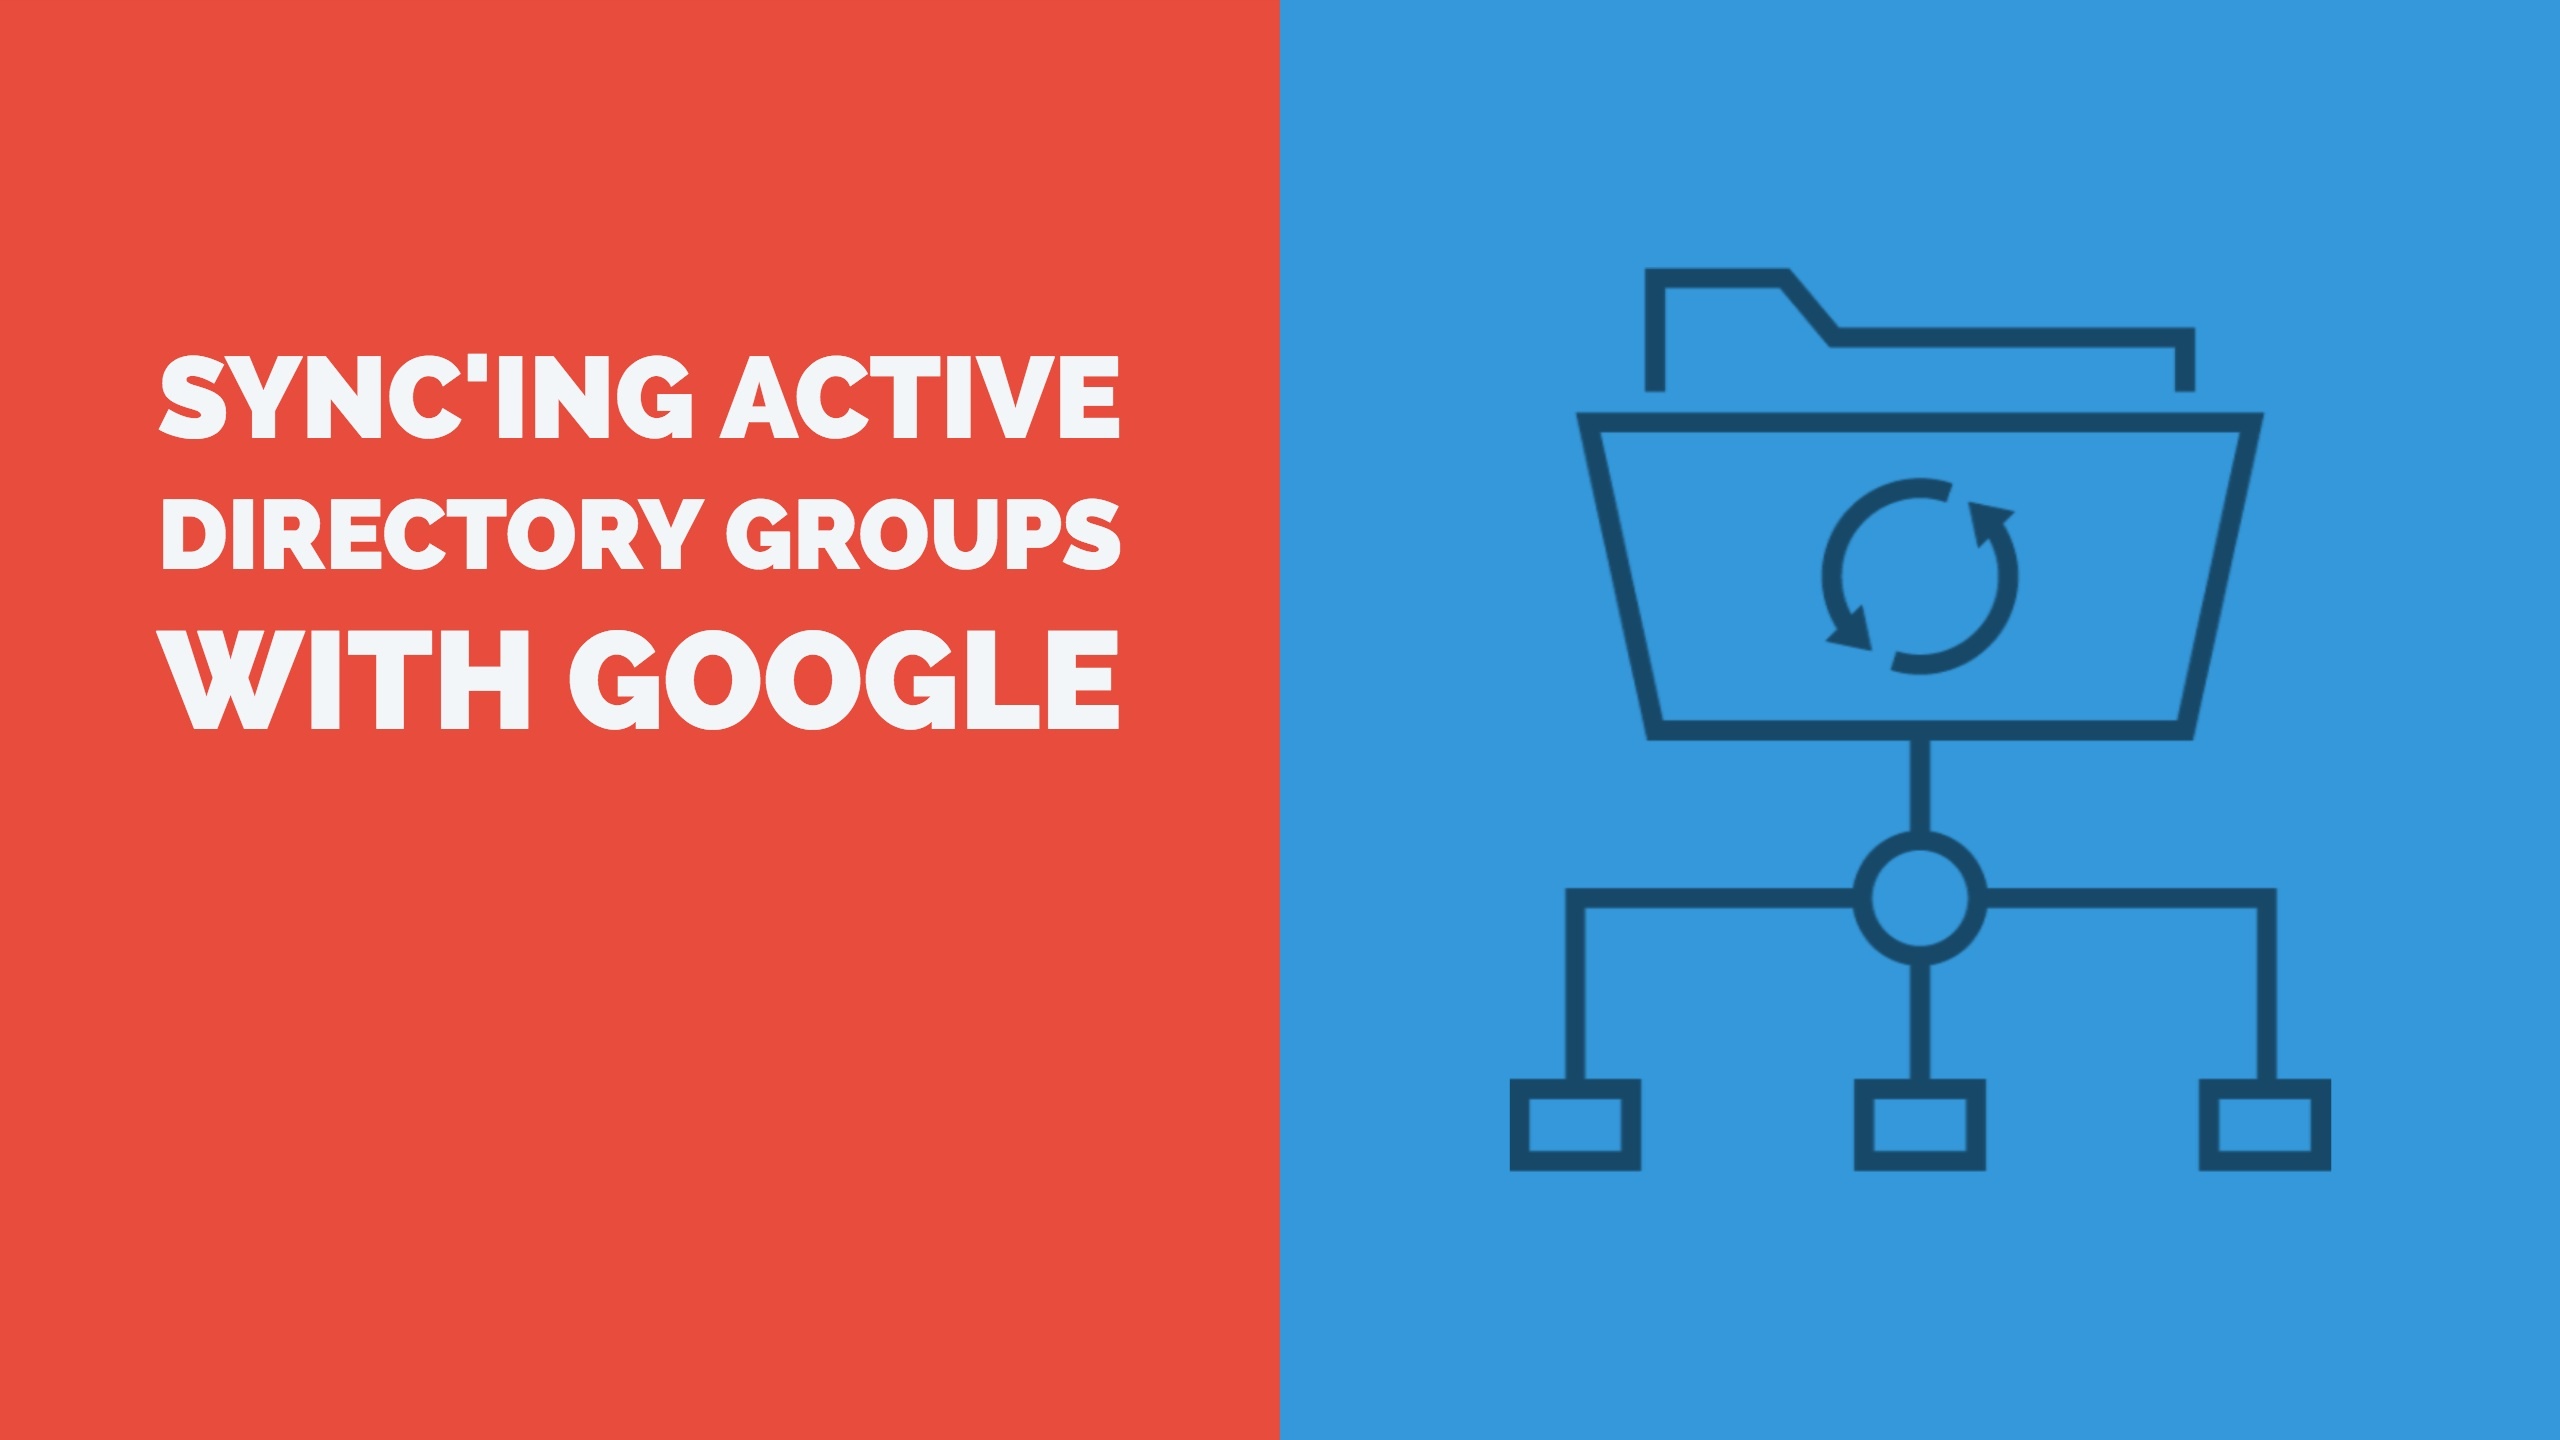 Sync’ing AD (Active Directory) groups with Google